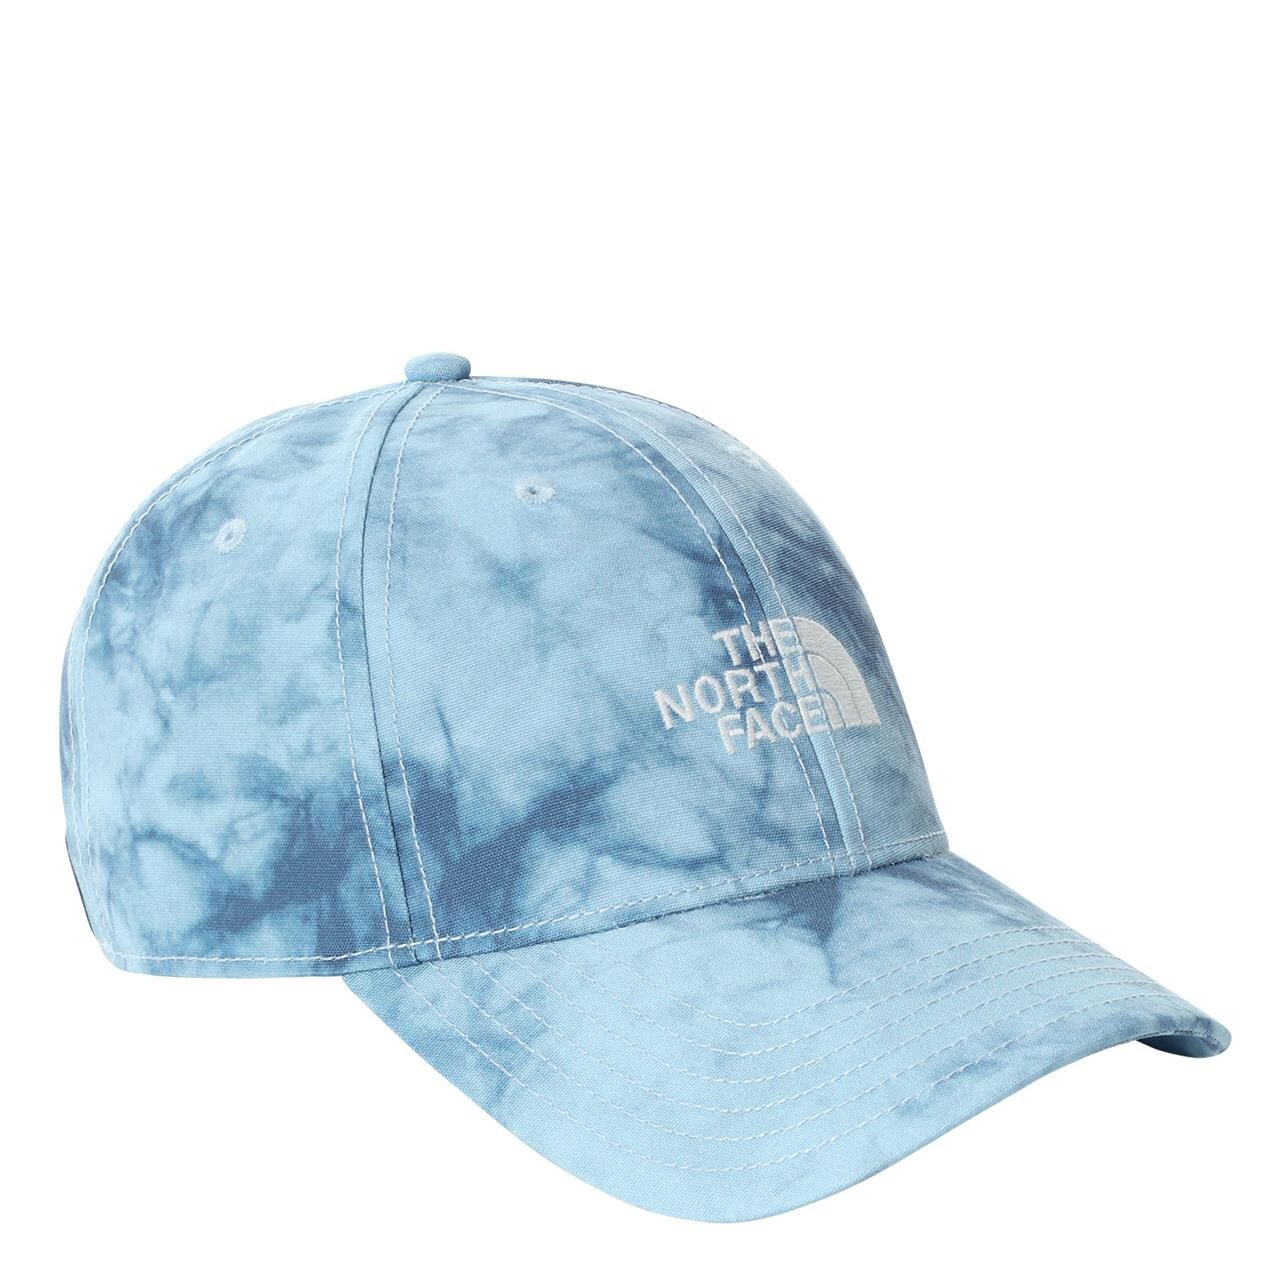 The North Face Recycled 66 Classic Hat (Blå (BETA BLUE TEXTURE SML PRINT) One size)